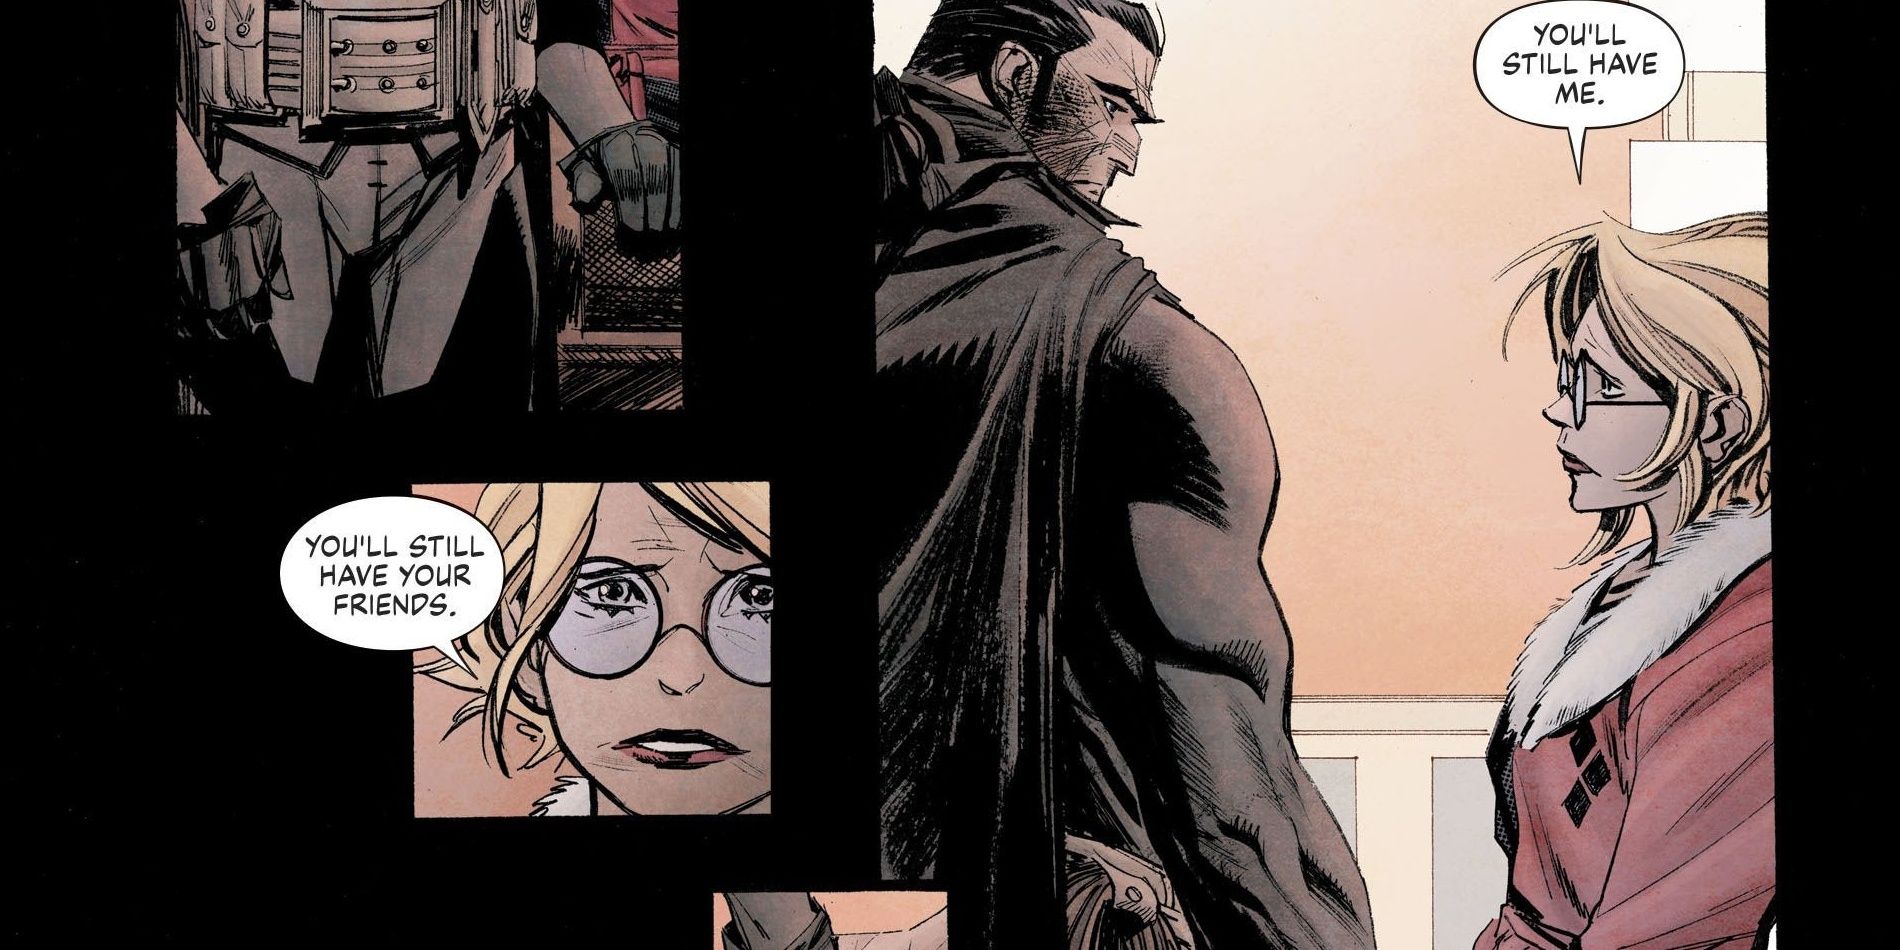 Batman/Bruce Wayne and Harley Quinn in Curse of the White Knight after the revelation of the former's heritage